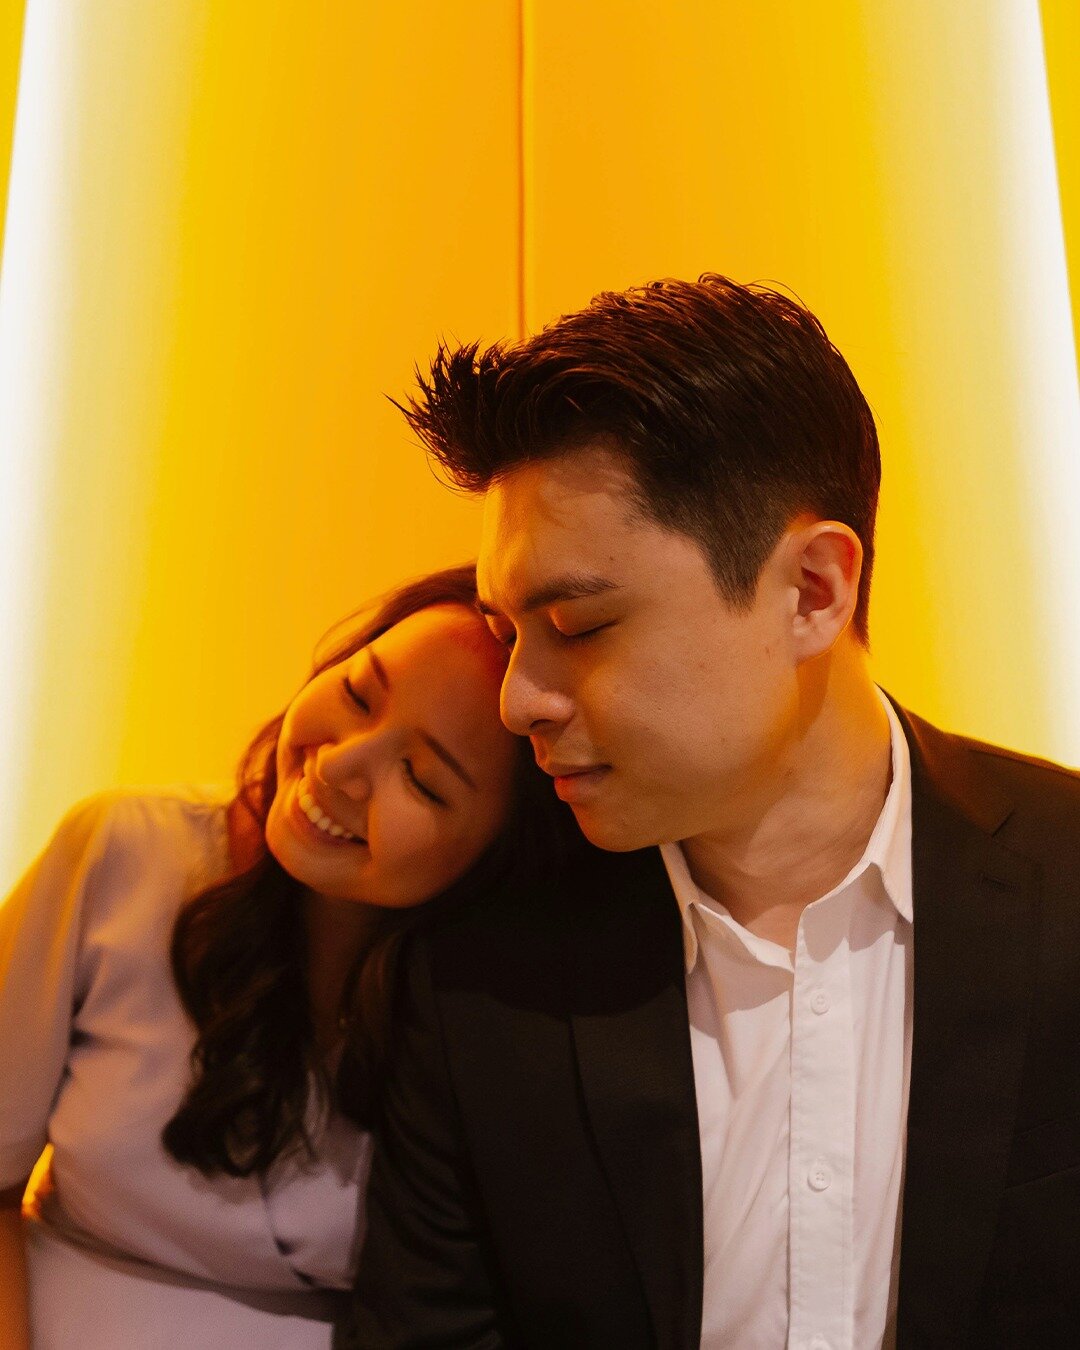 from interns to inseparable, glendon and isabel's tale of love started with a chance meeting at the office cafeteria. witness the magic of shared lunches and stolen glances as their story unfolds
.
for more info on our 2024 pre wedding packages, reac